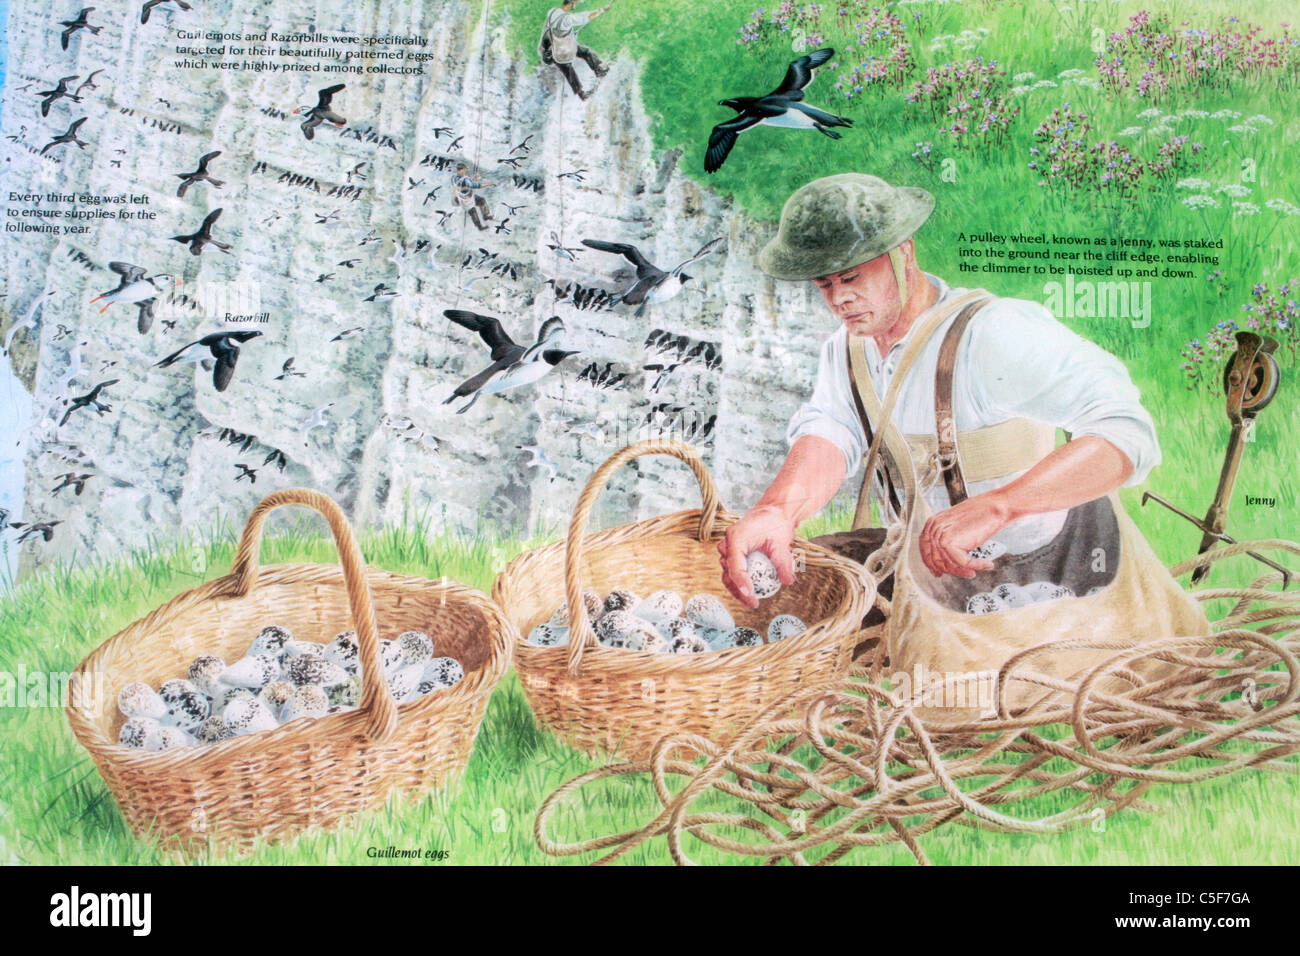 Information Board Showing a Climmer Collecting Seabird Eggs From Bempton Cliffs, UK Stock Photo